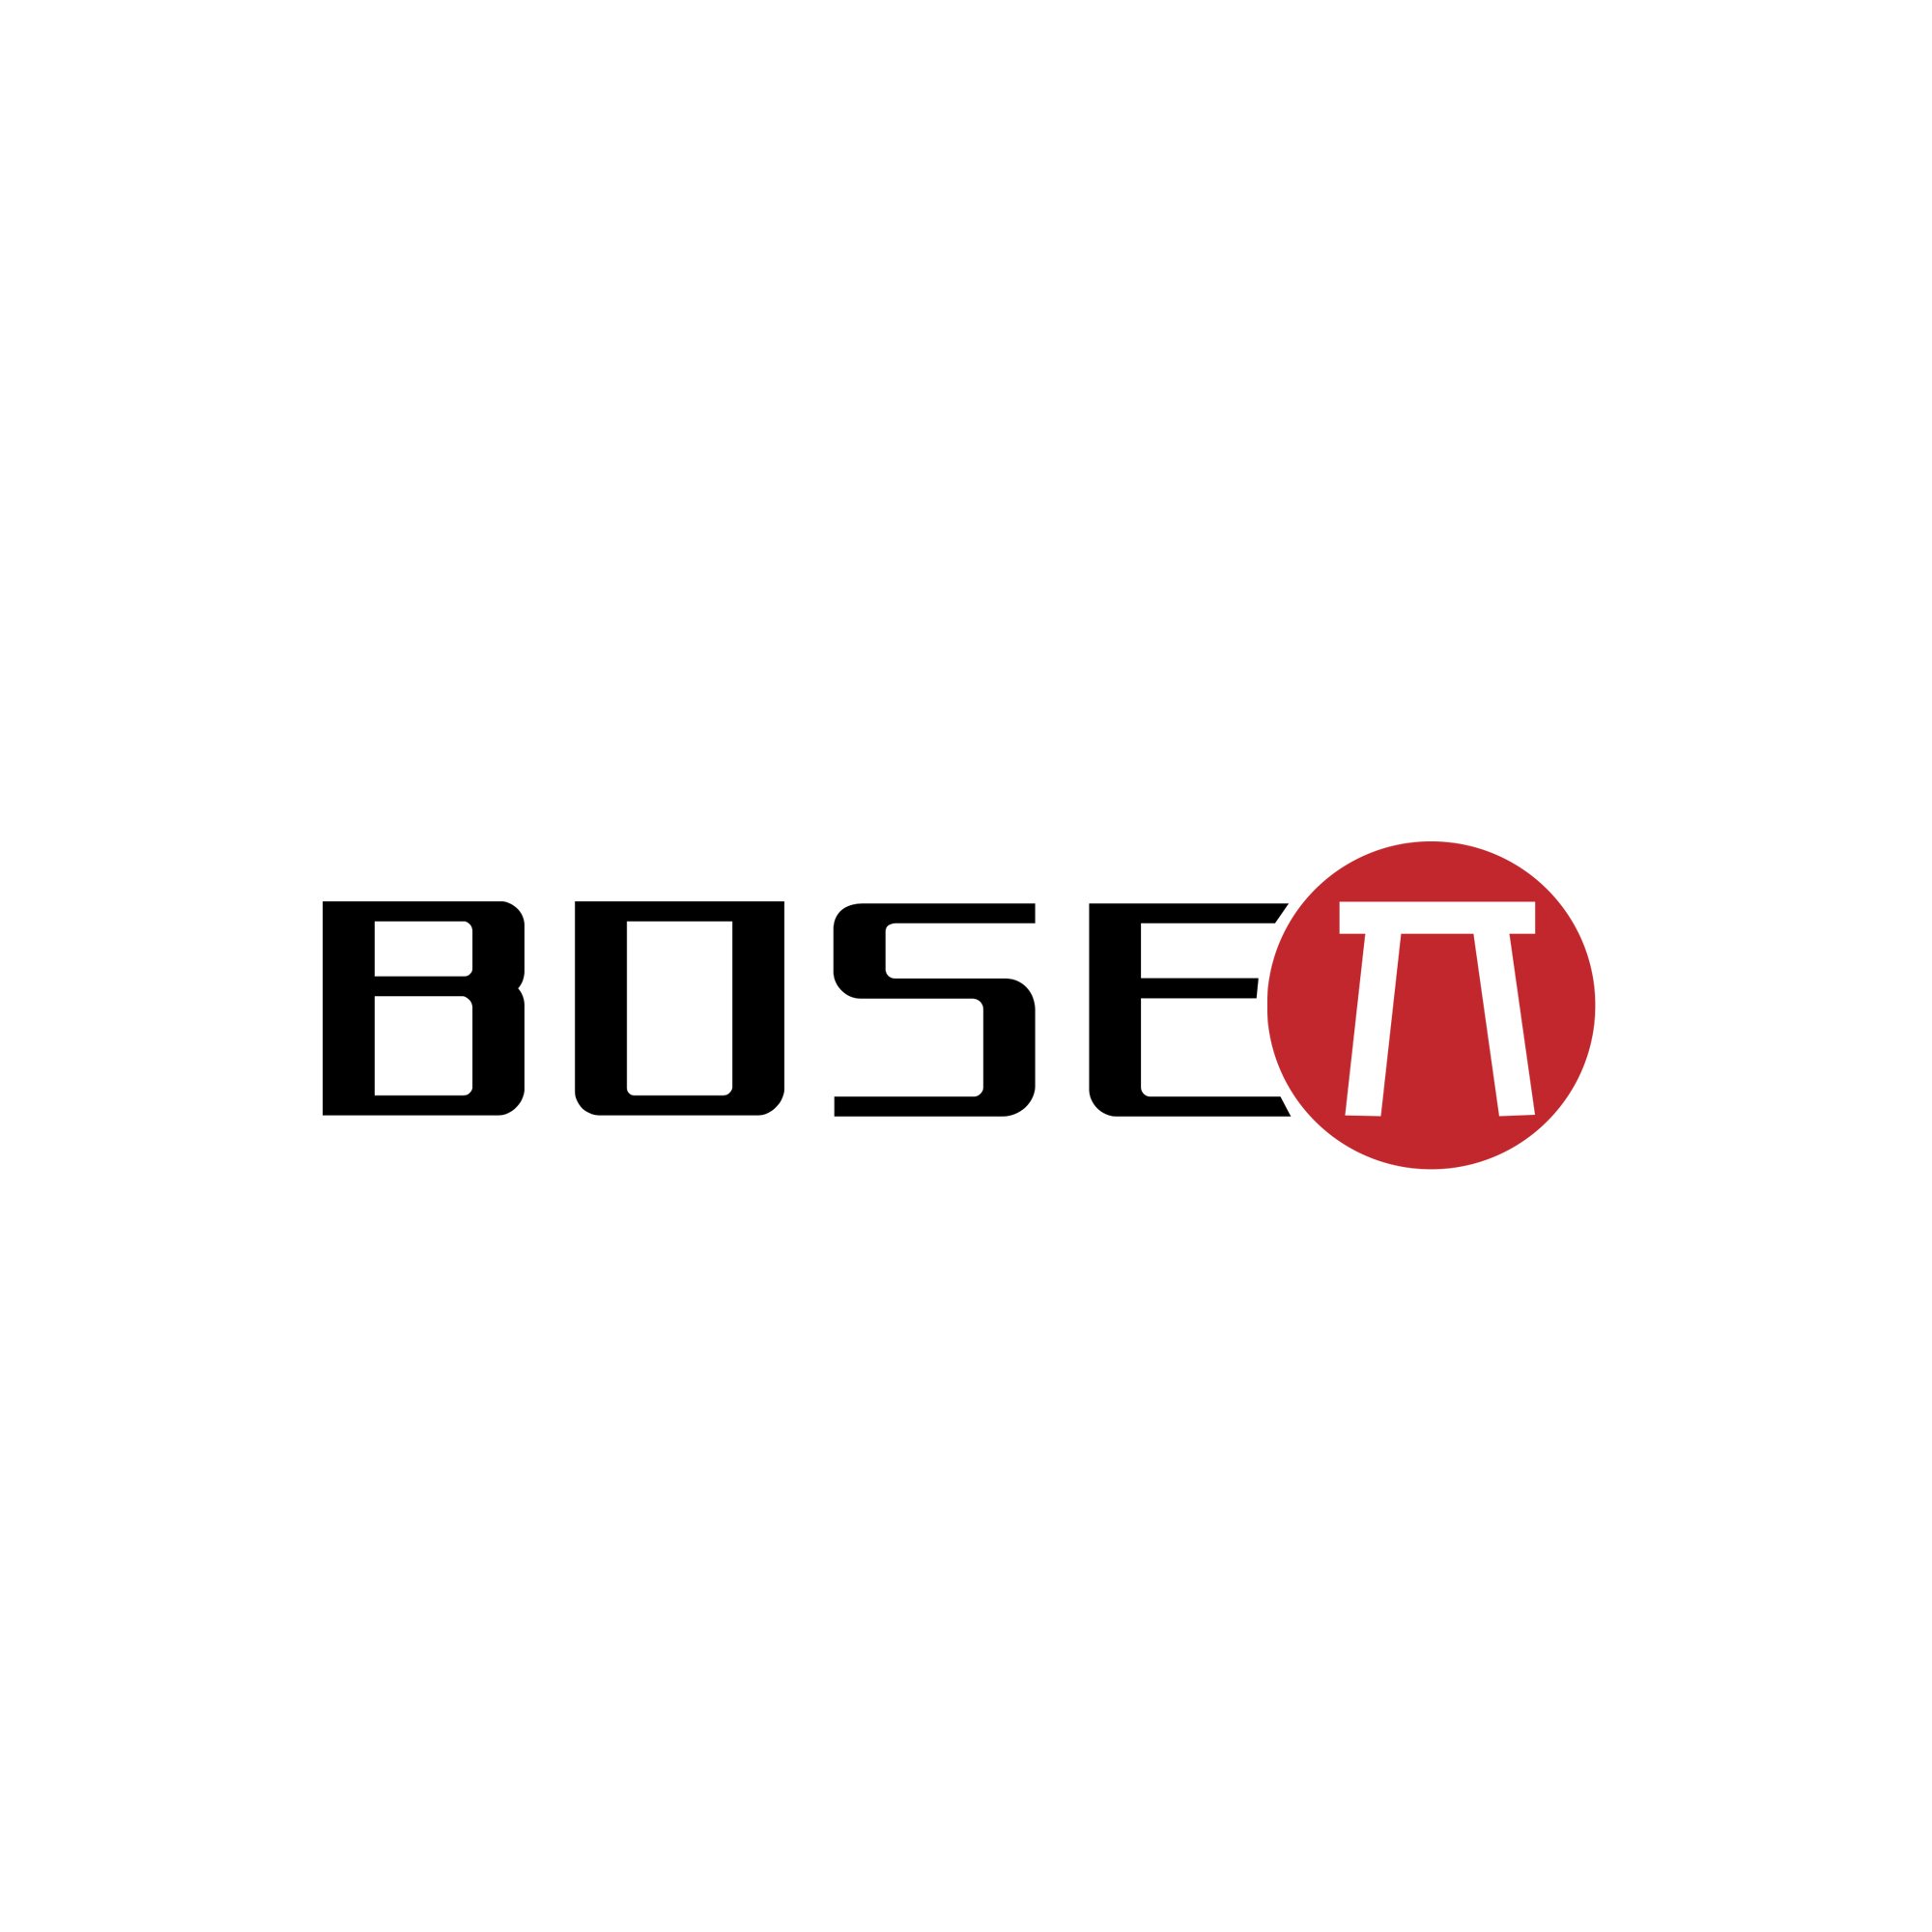 TIANJIN BOSEN INT'https://t.co/0mMEo1GdiC.,LTD is specialized in the manufacture of furniture,located in tianjin china cynthia@bosen-furniture.com